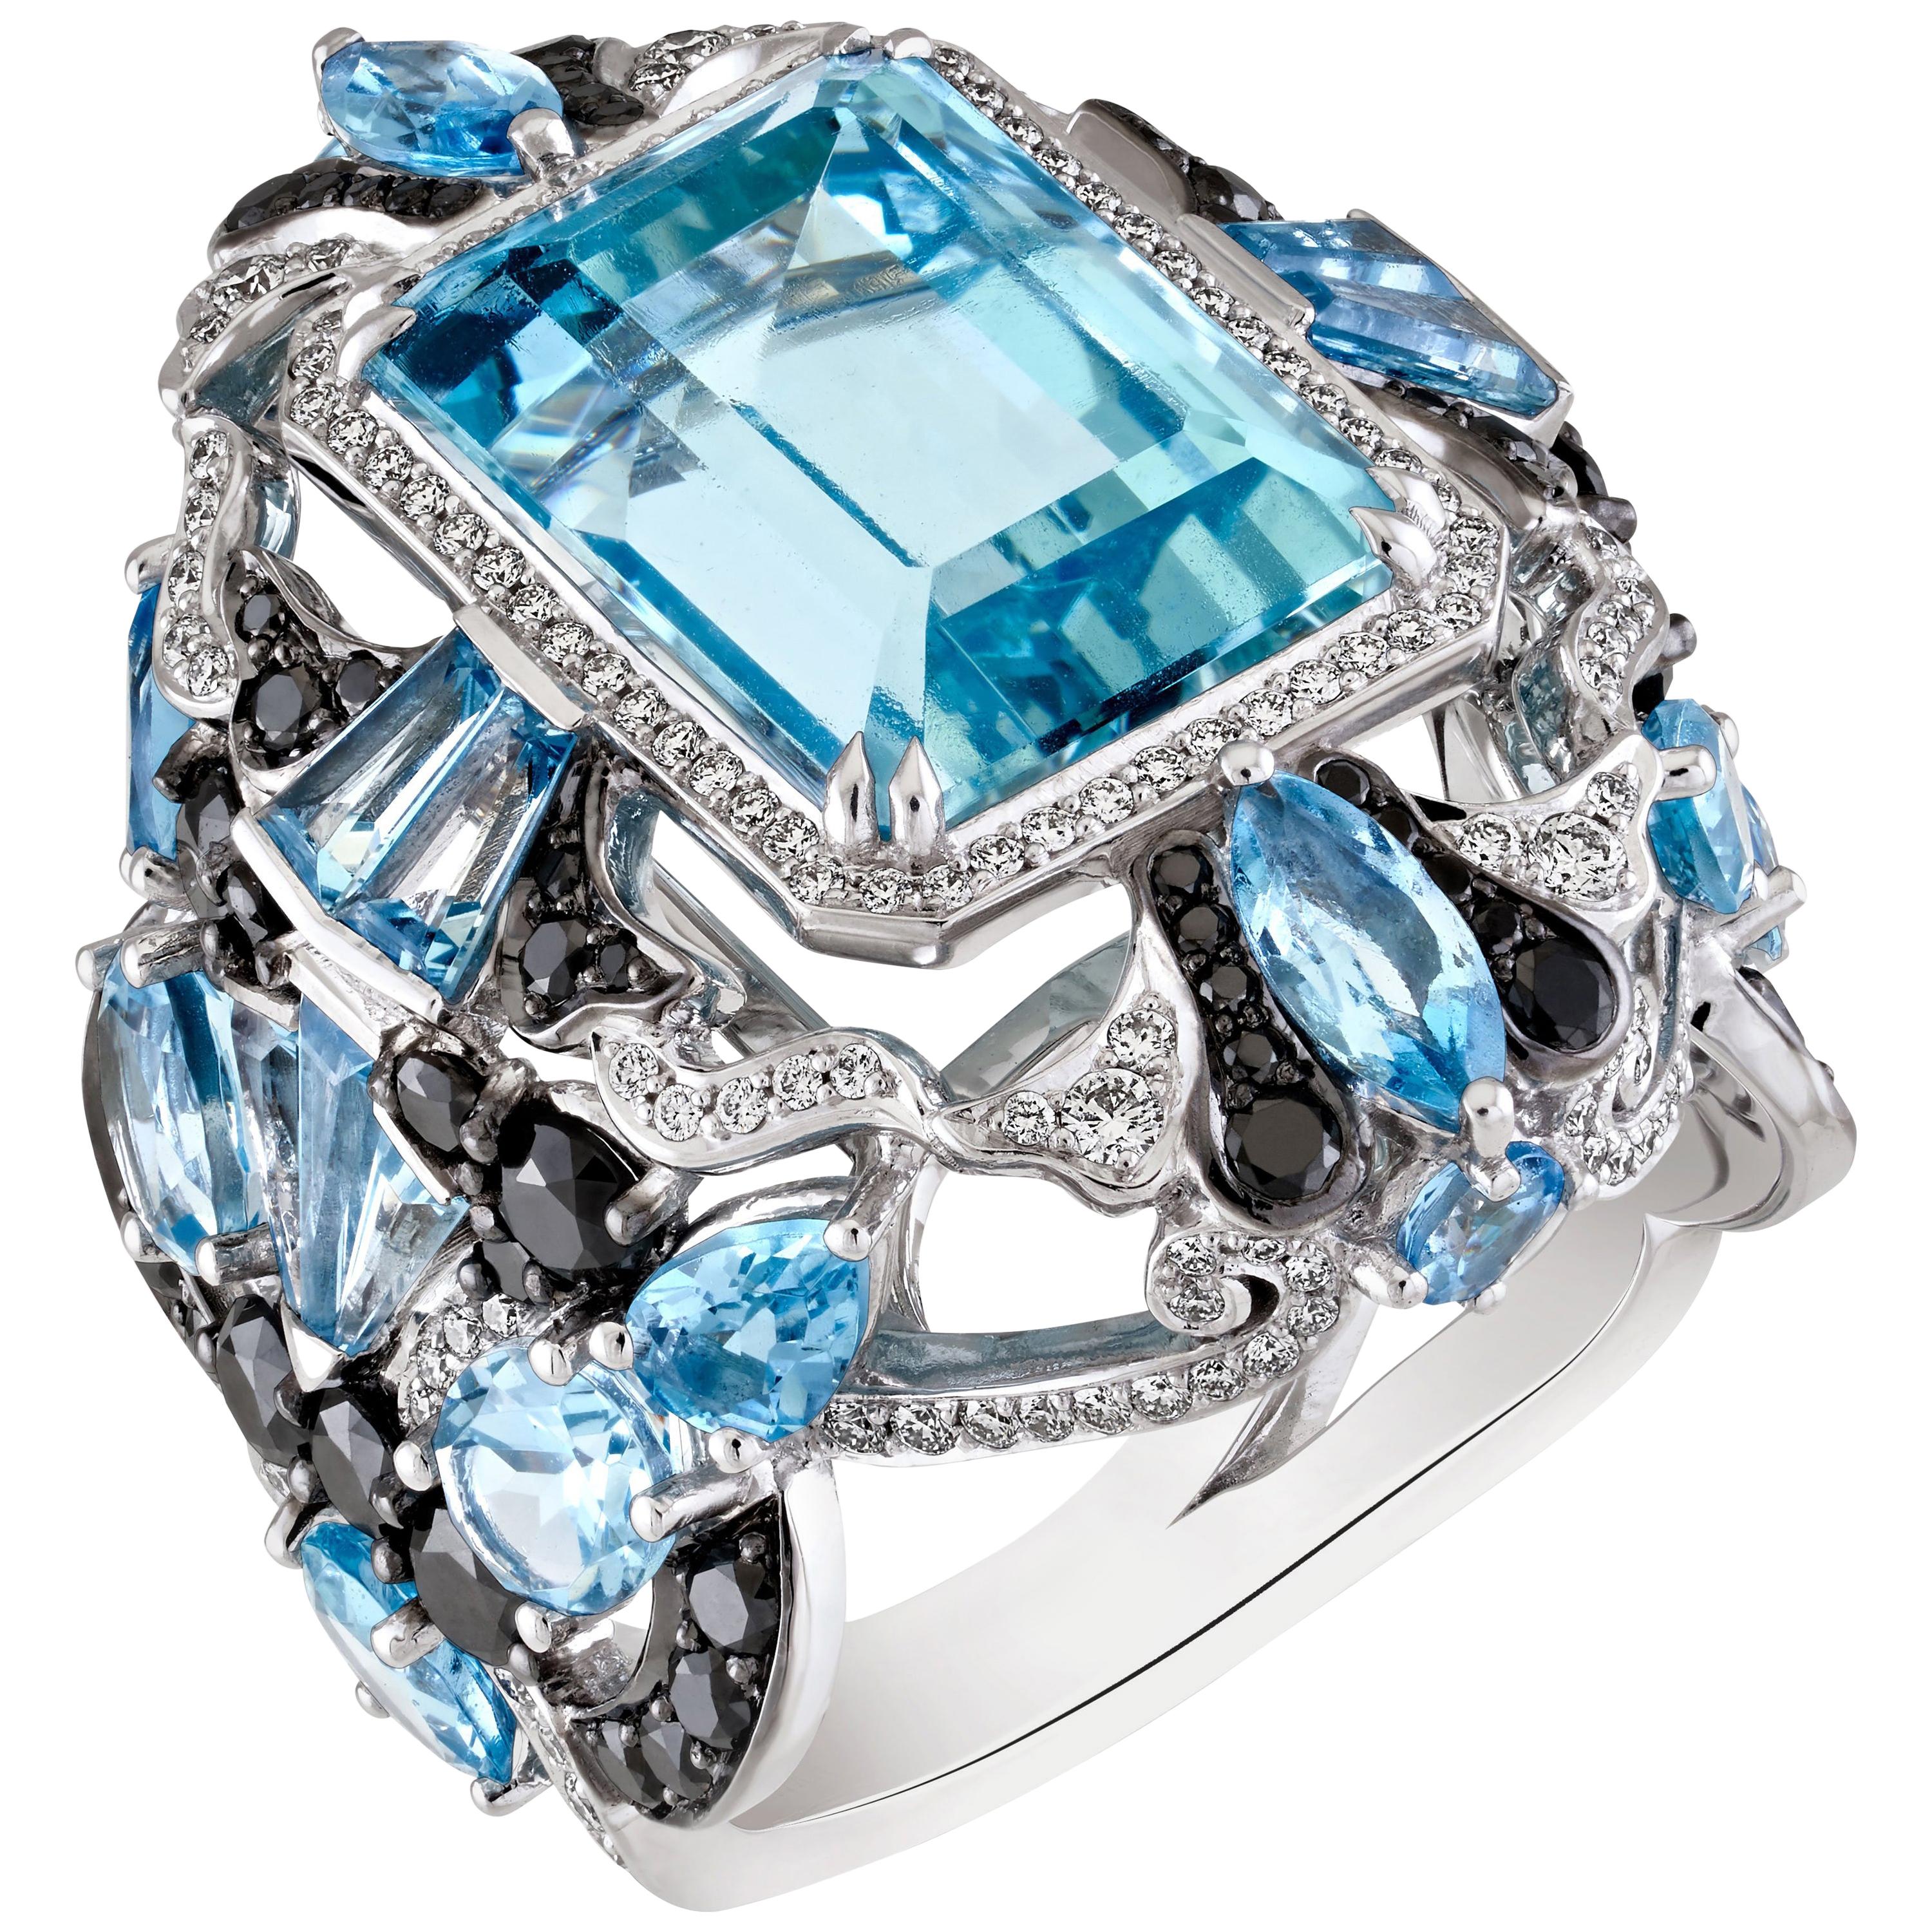 9.328 Carat Aquamarine with Black and White Diamonds Cocktail Ring in 18K Gold